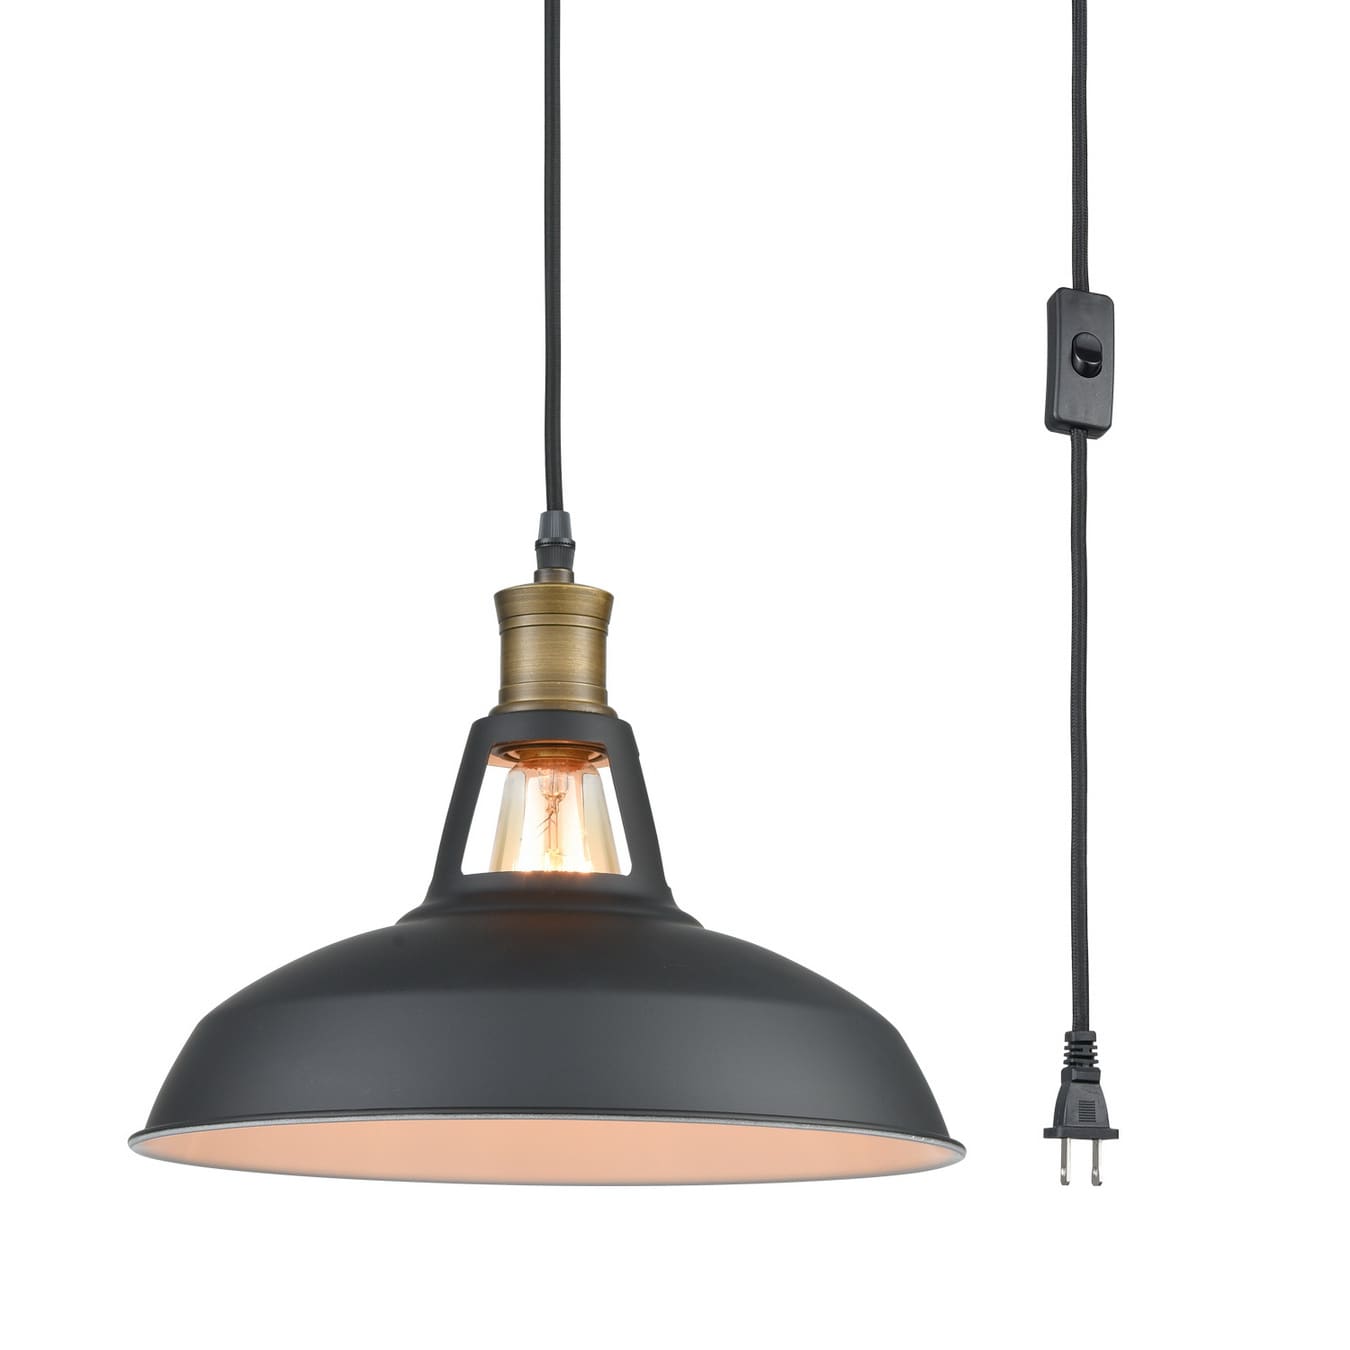 Industrial Plug in Pendant Light Barn Shape with On/Off Switch